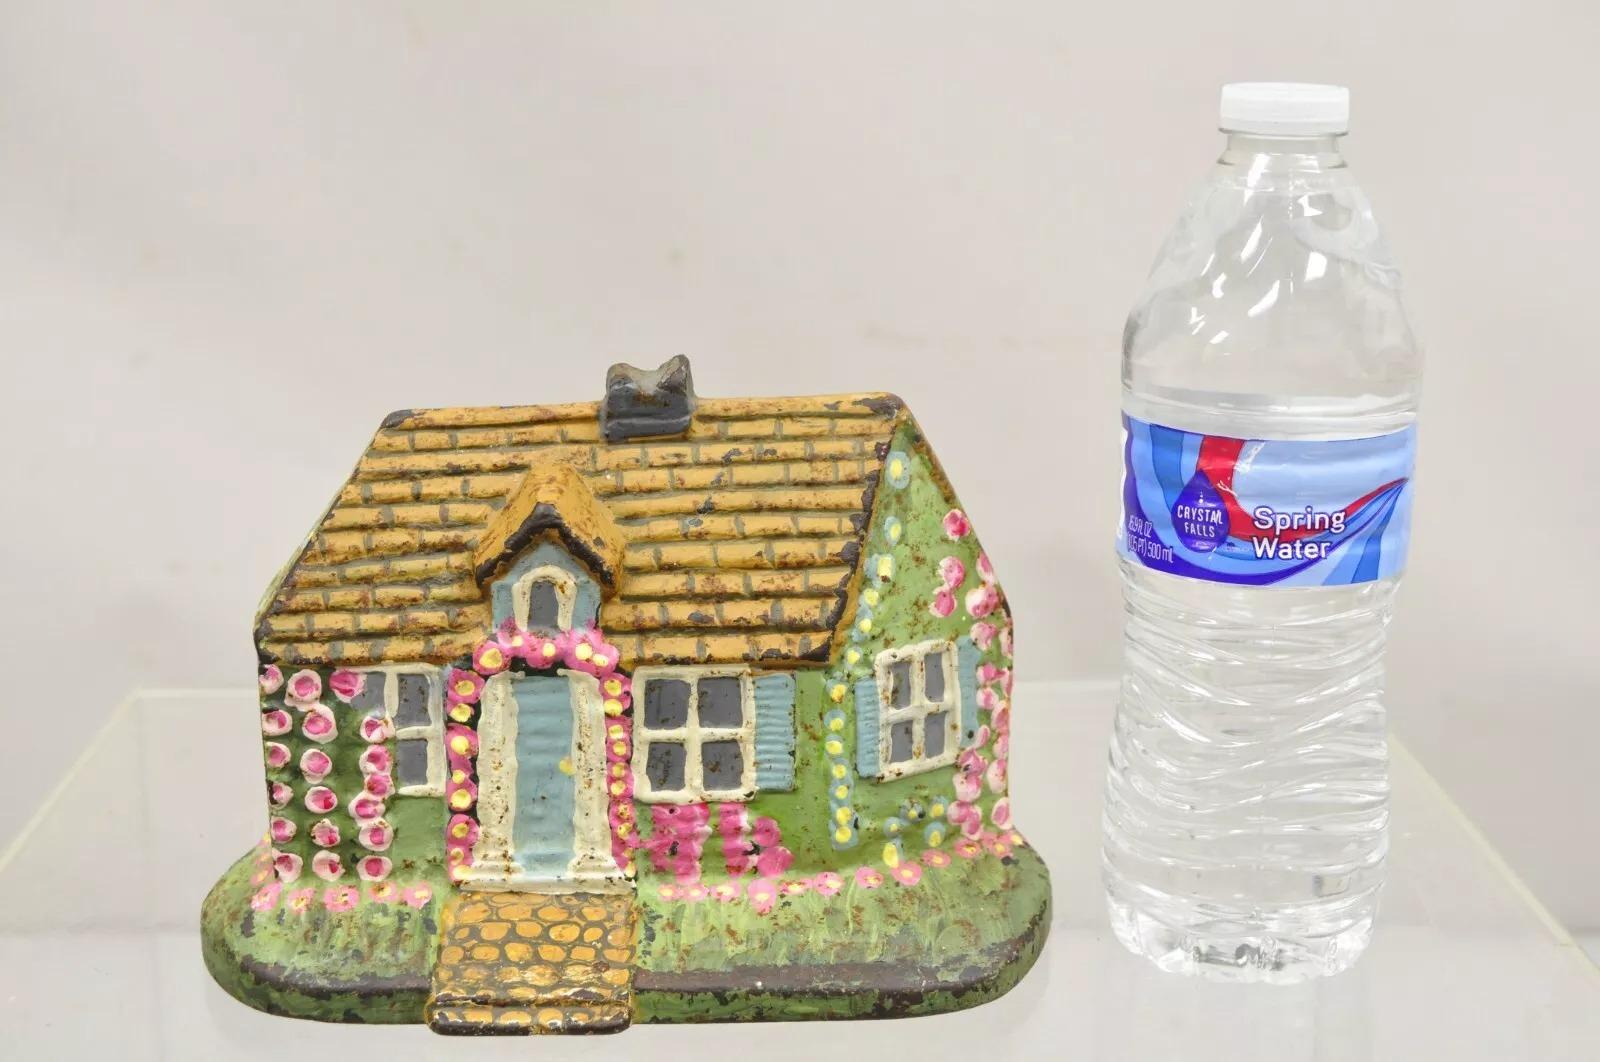 Antique Victorian Cast Iron Painted Green and Pink Cottage House Door Stop. Circa Early 1900s. Measurements: 5.5